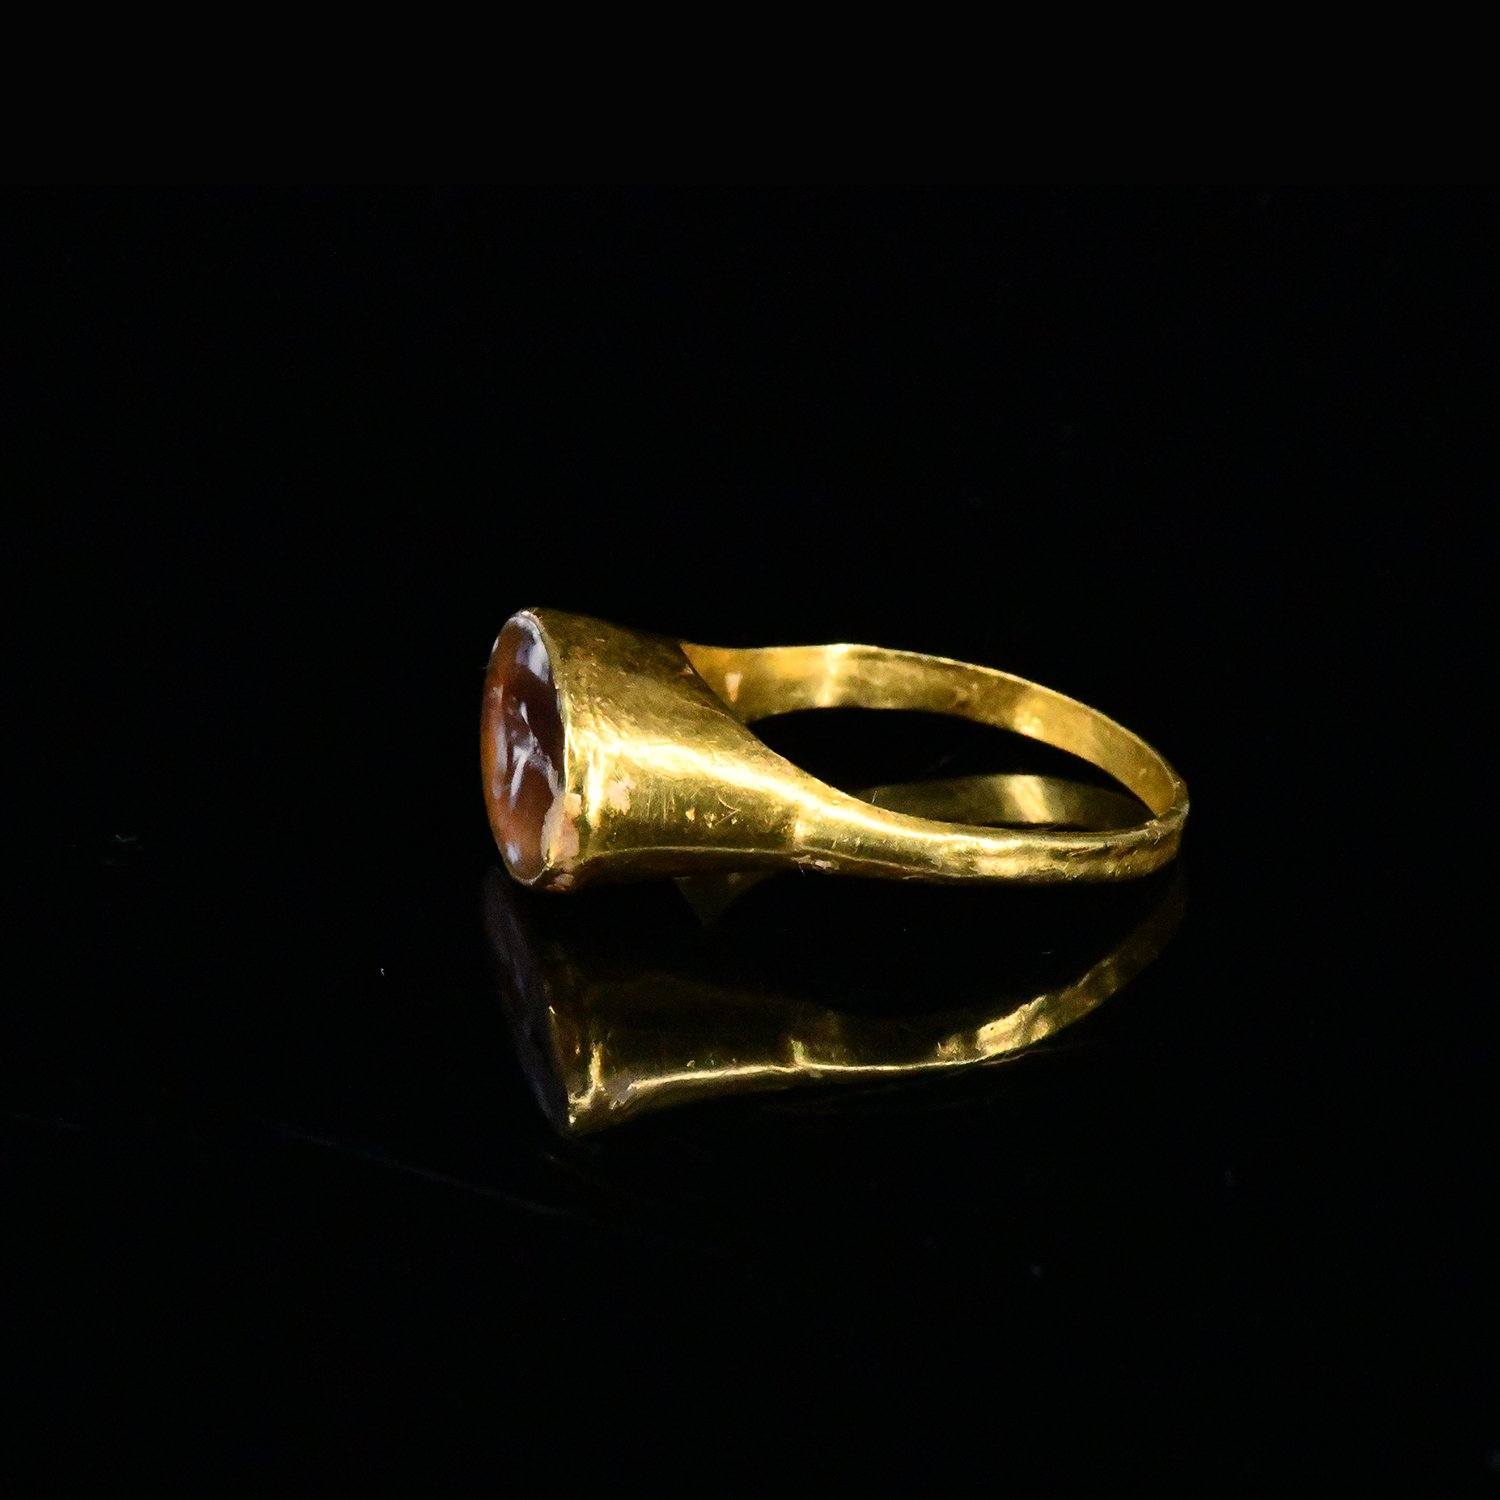 A Roman Gold and Agate Finger Ring, ca. 2nd century CE